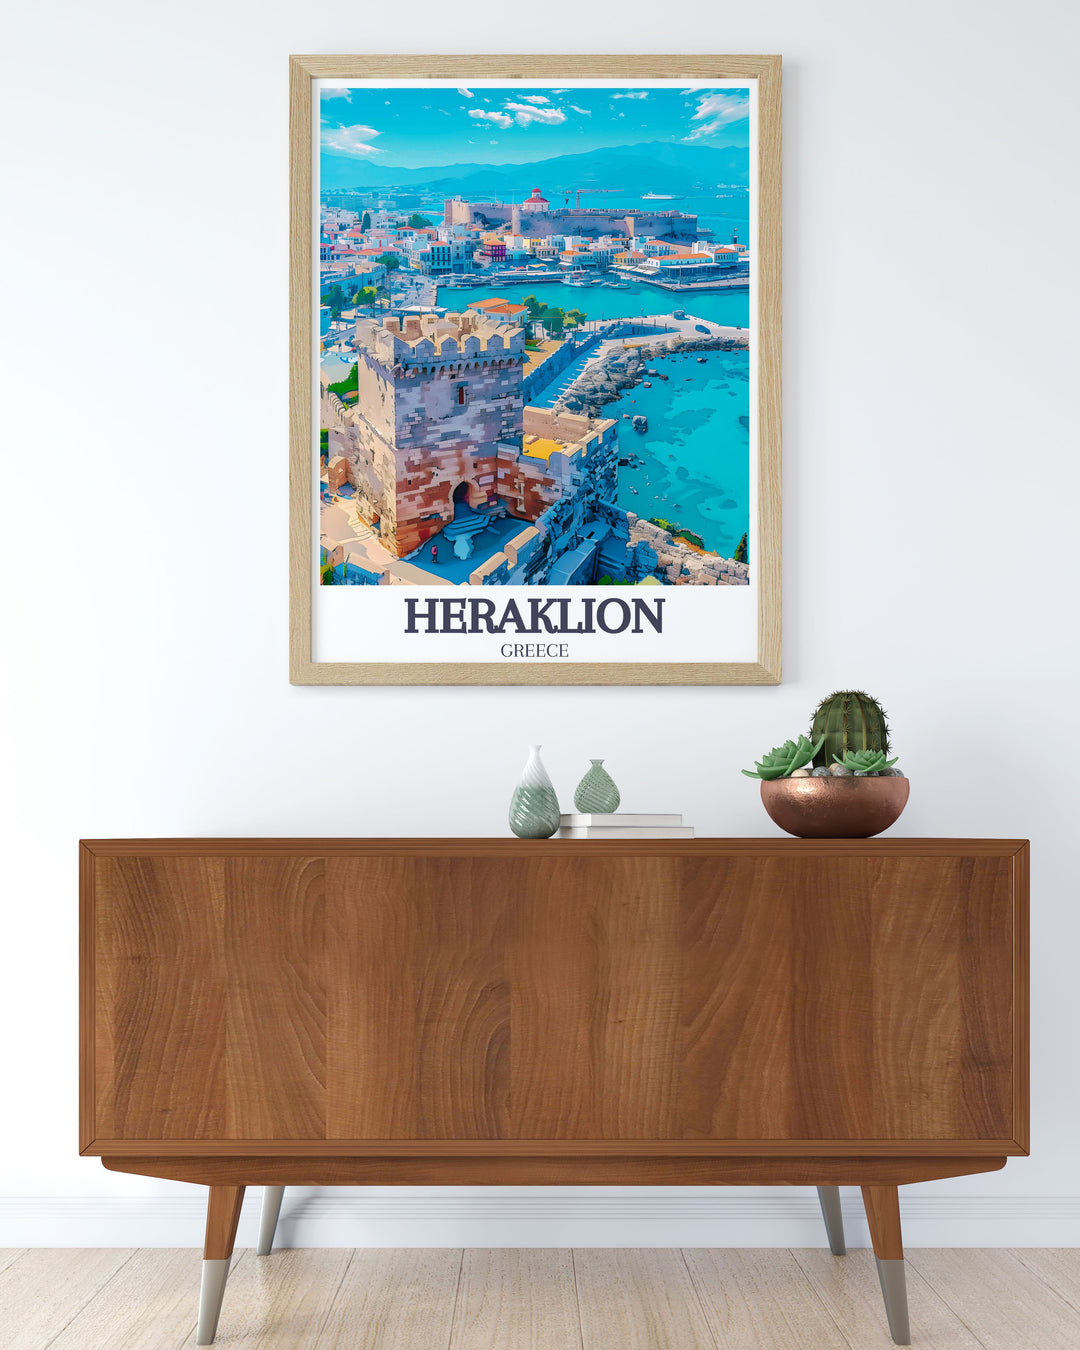 Gallery wall art of Heraklion, highlighting the majestic Venetian Fortress of Koules in Crete, Greece. This print features the fortresss detailed architecture and panoramic views, offering a captivating depiction of Greek fortifications.